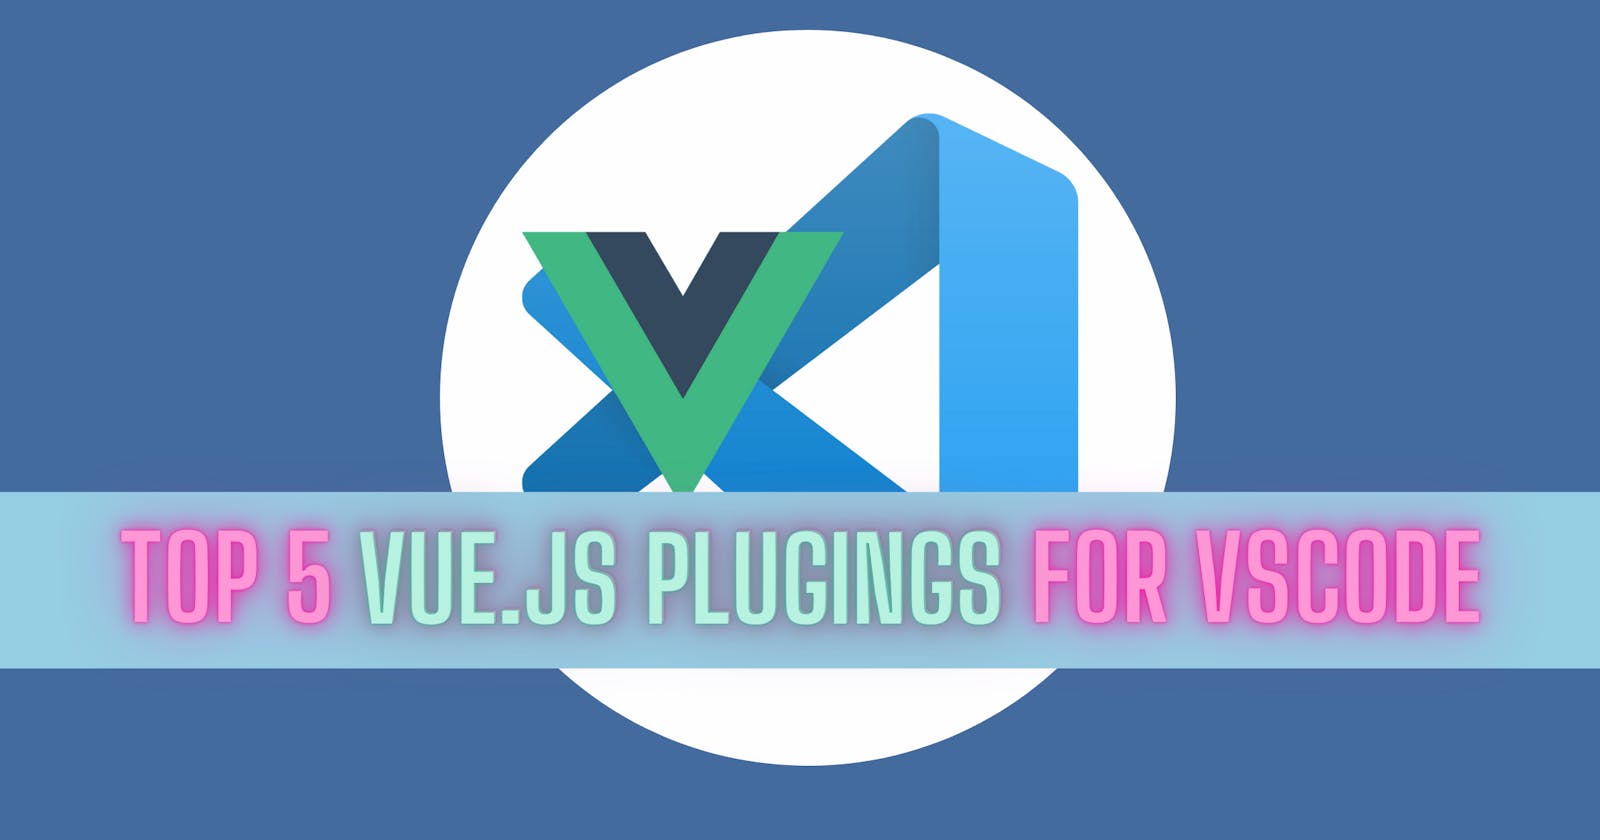 Top 5 VS Code extensions for Vue developers for 2022